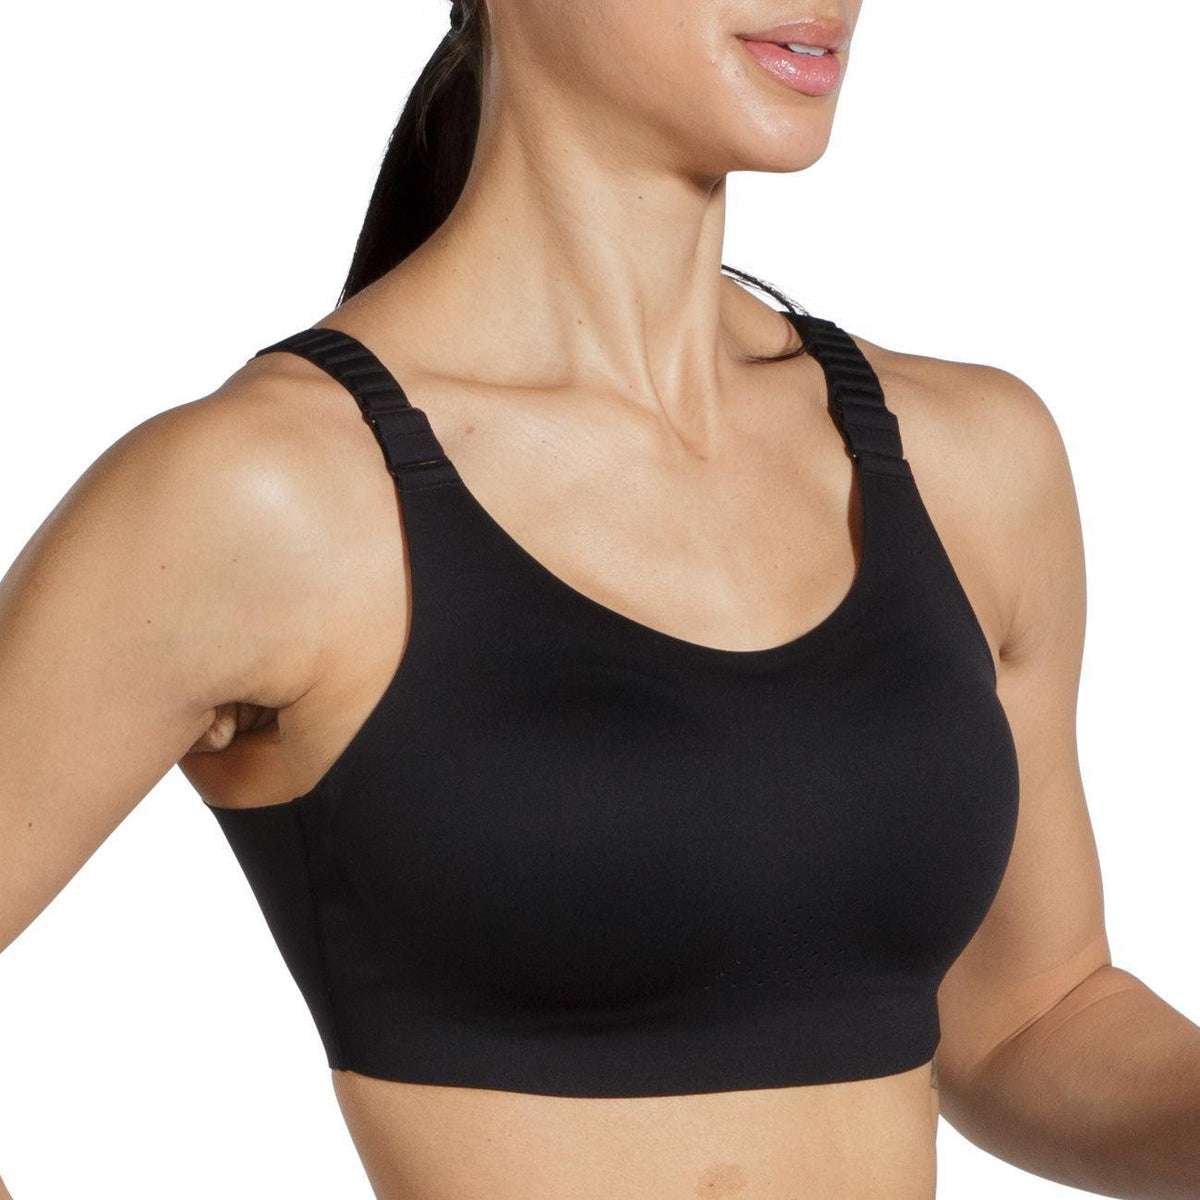 ON WOMENS ACTIVE BRA  BLACK – Taskers Sports